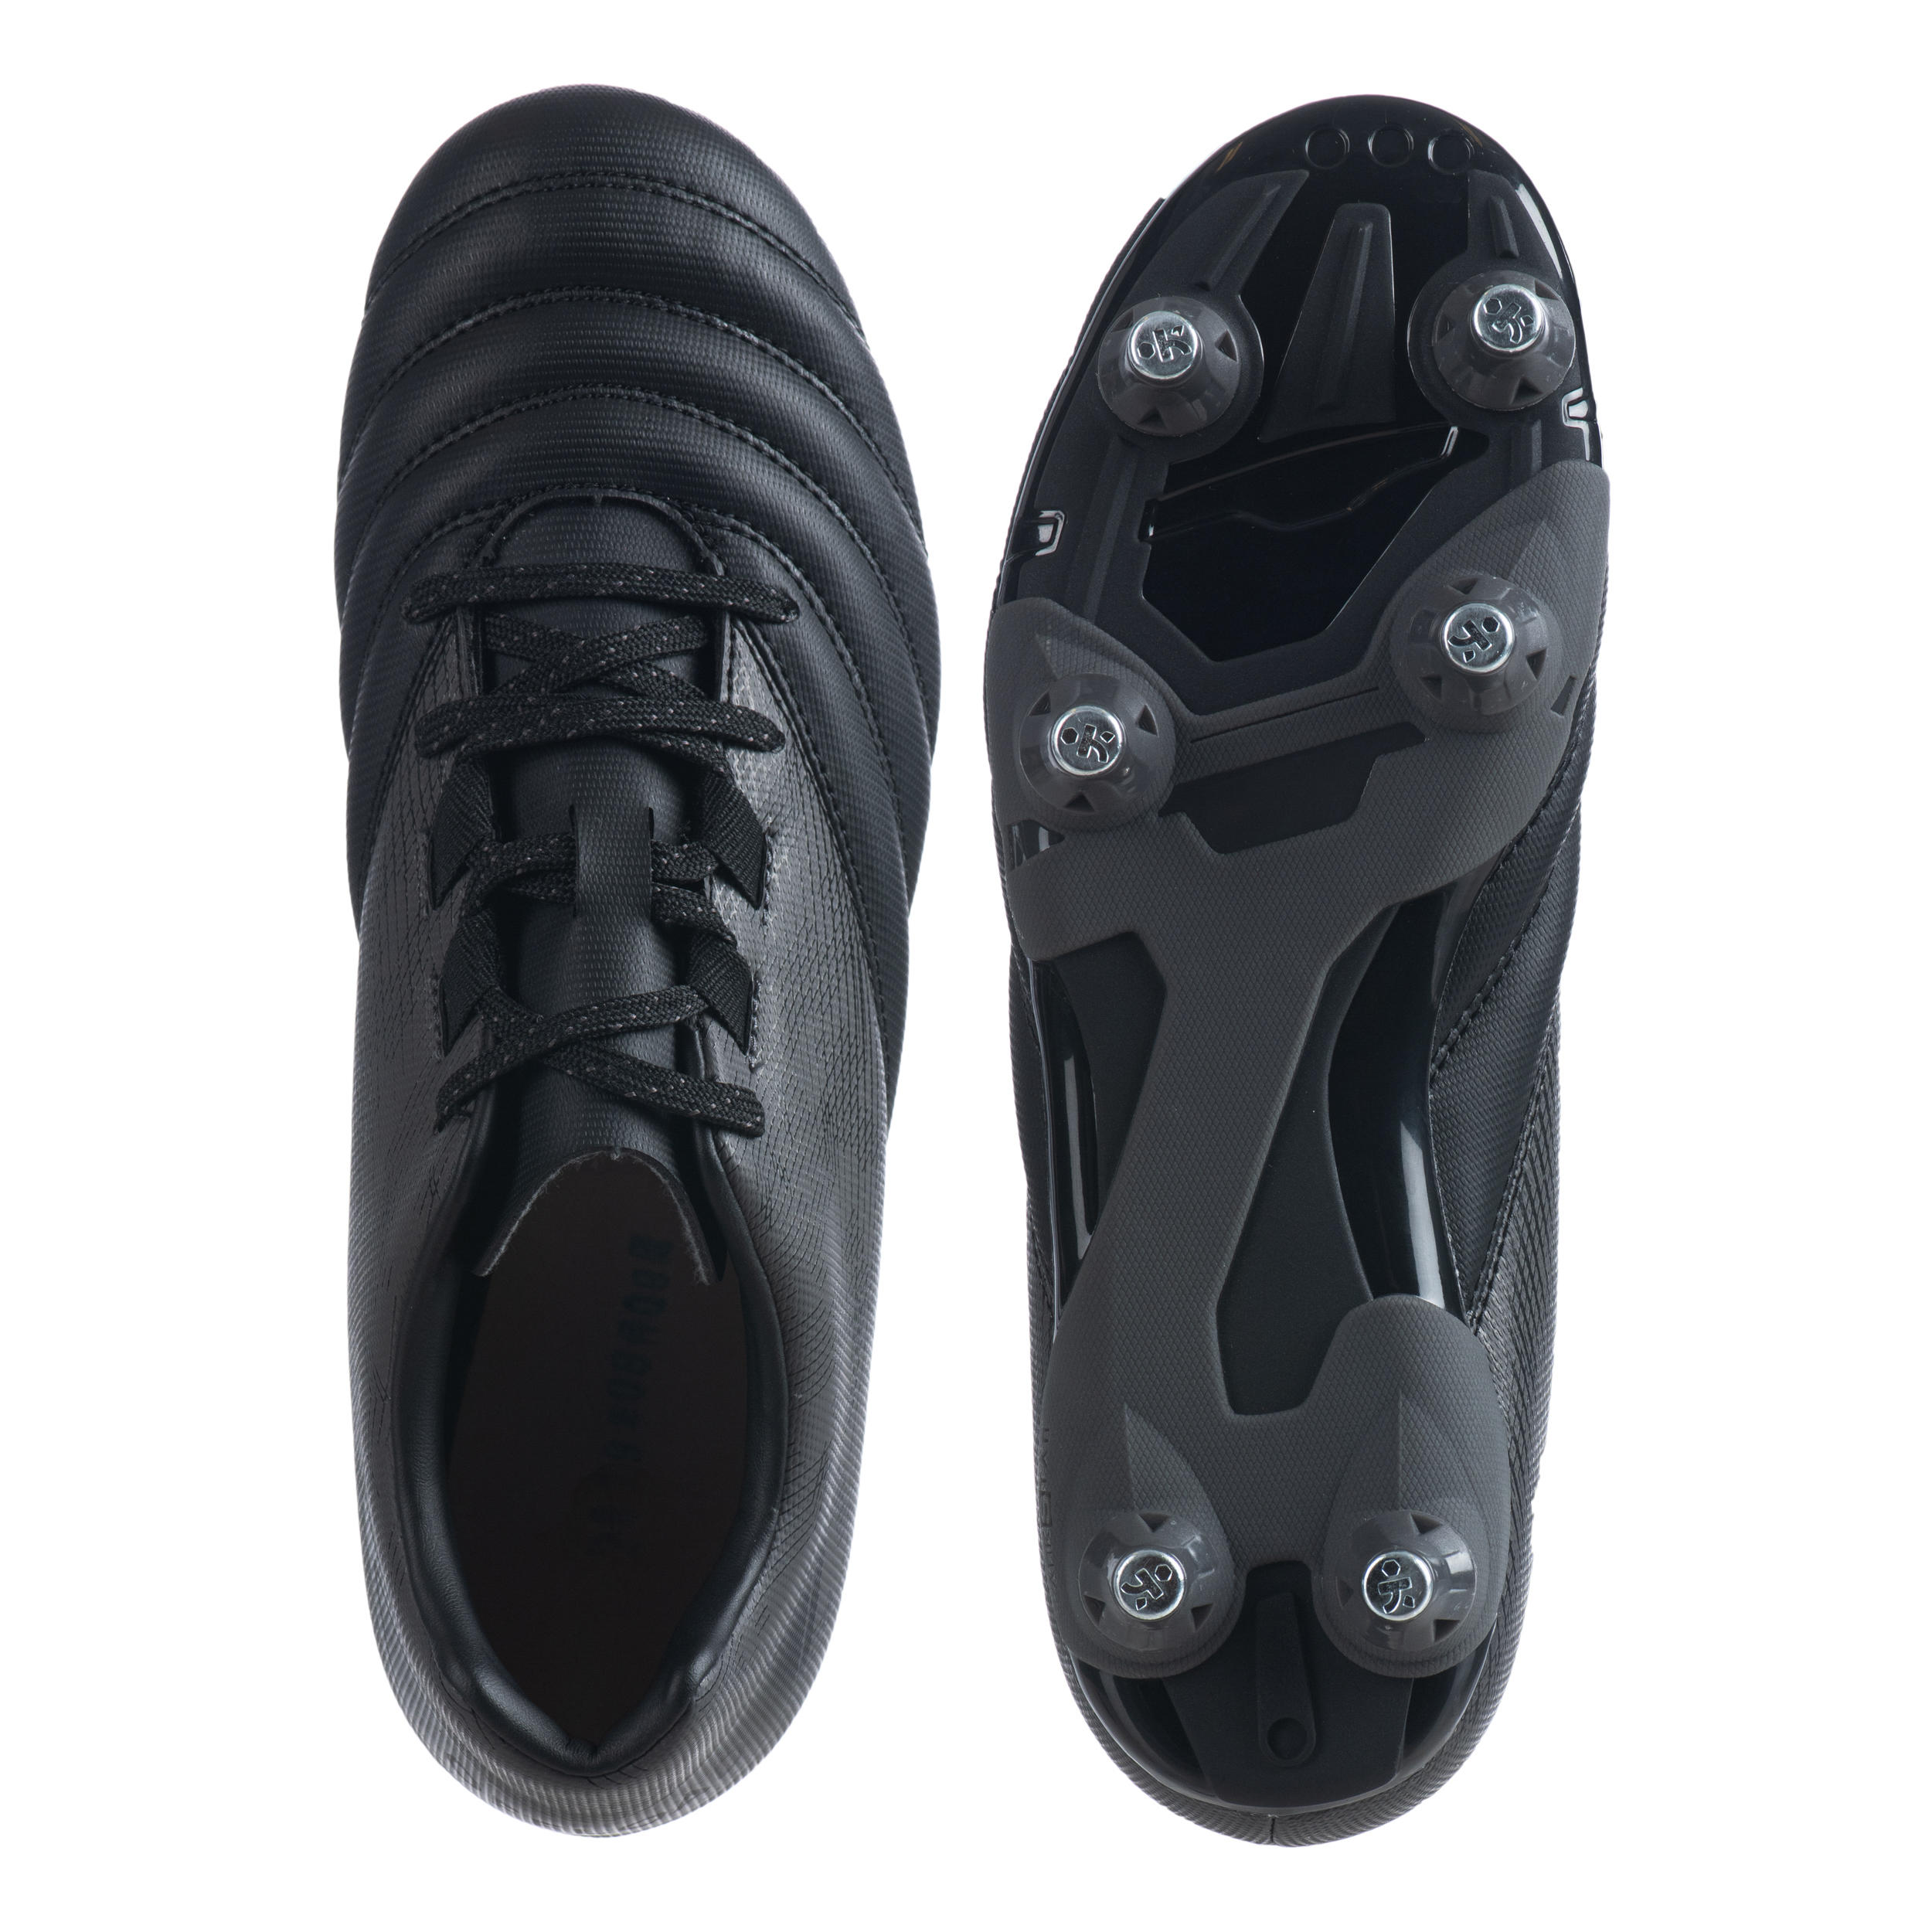 Kids' Soft Ground Studded Rugby Boots R500 SG - Black 4/7